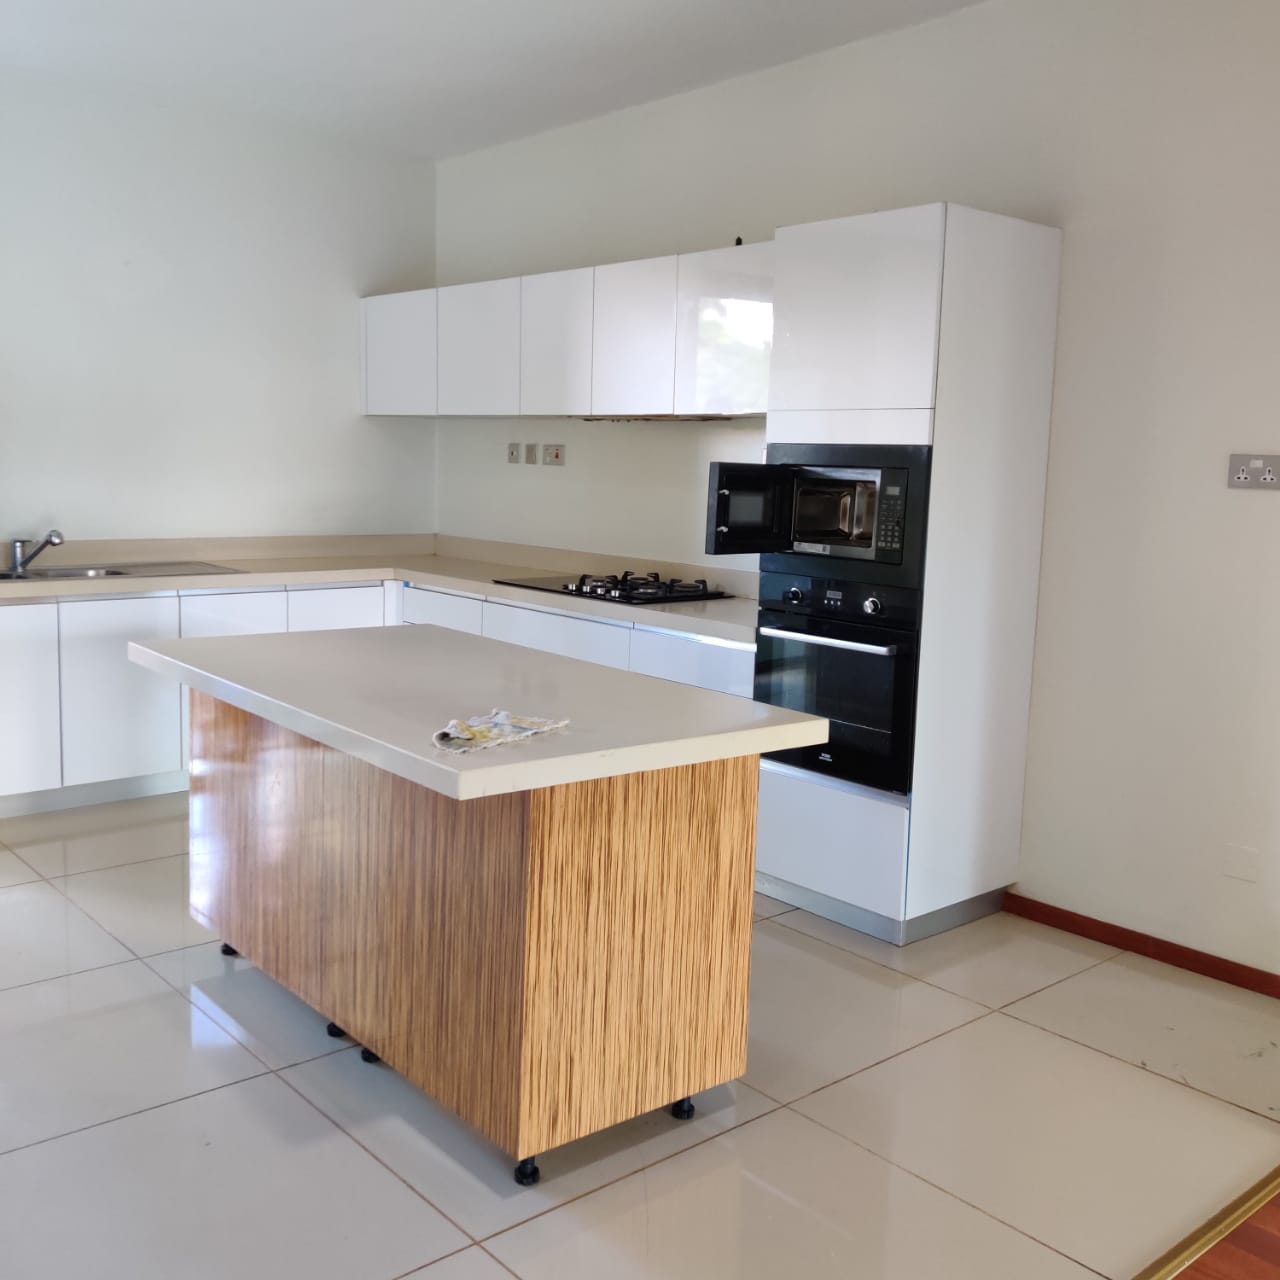 3-Bedroom Apartment with SQ for Rent located in Muthaiga, with a Breathtaking view of Karura Forest - from Ksh160k6